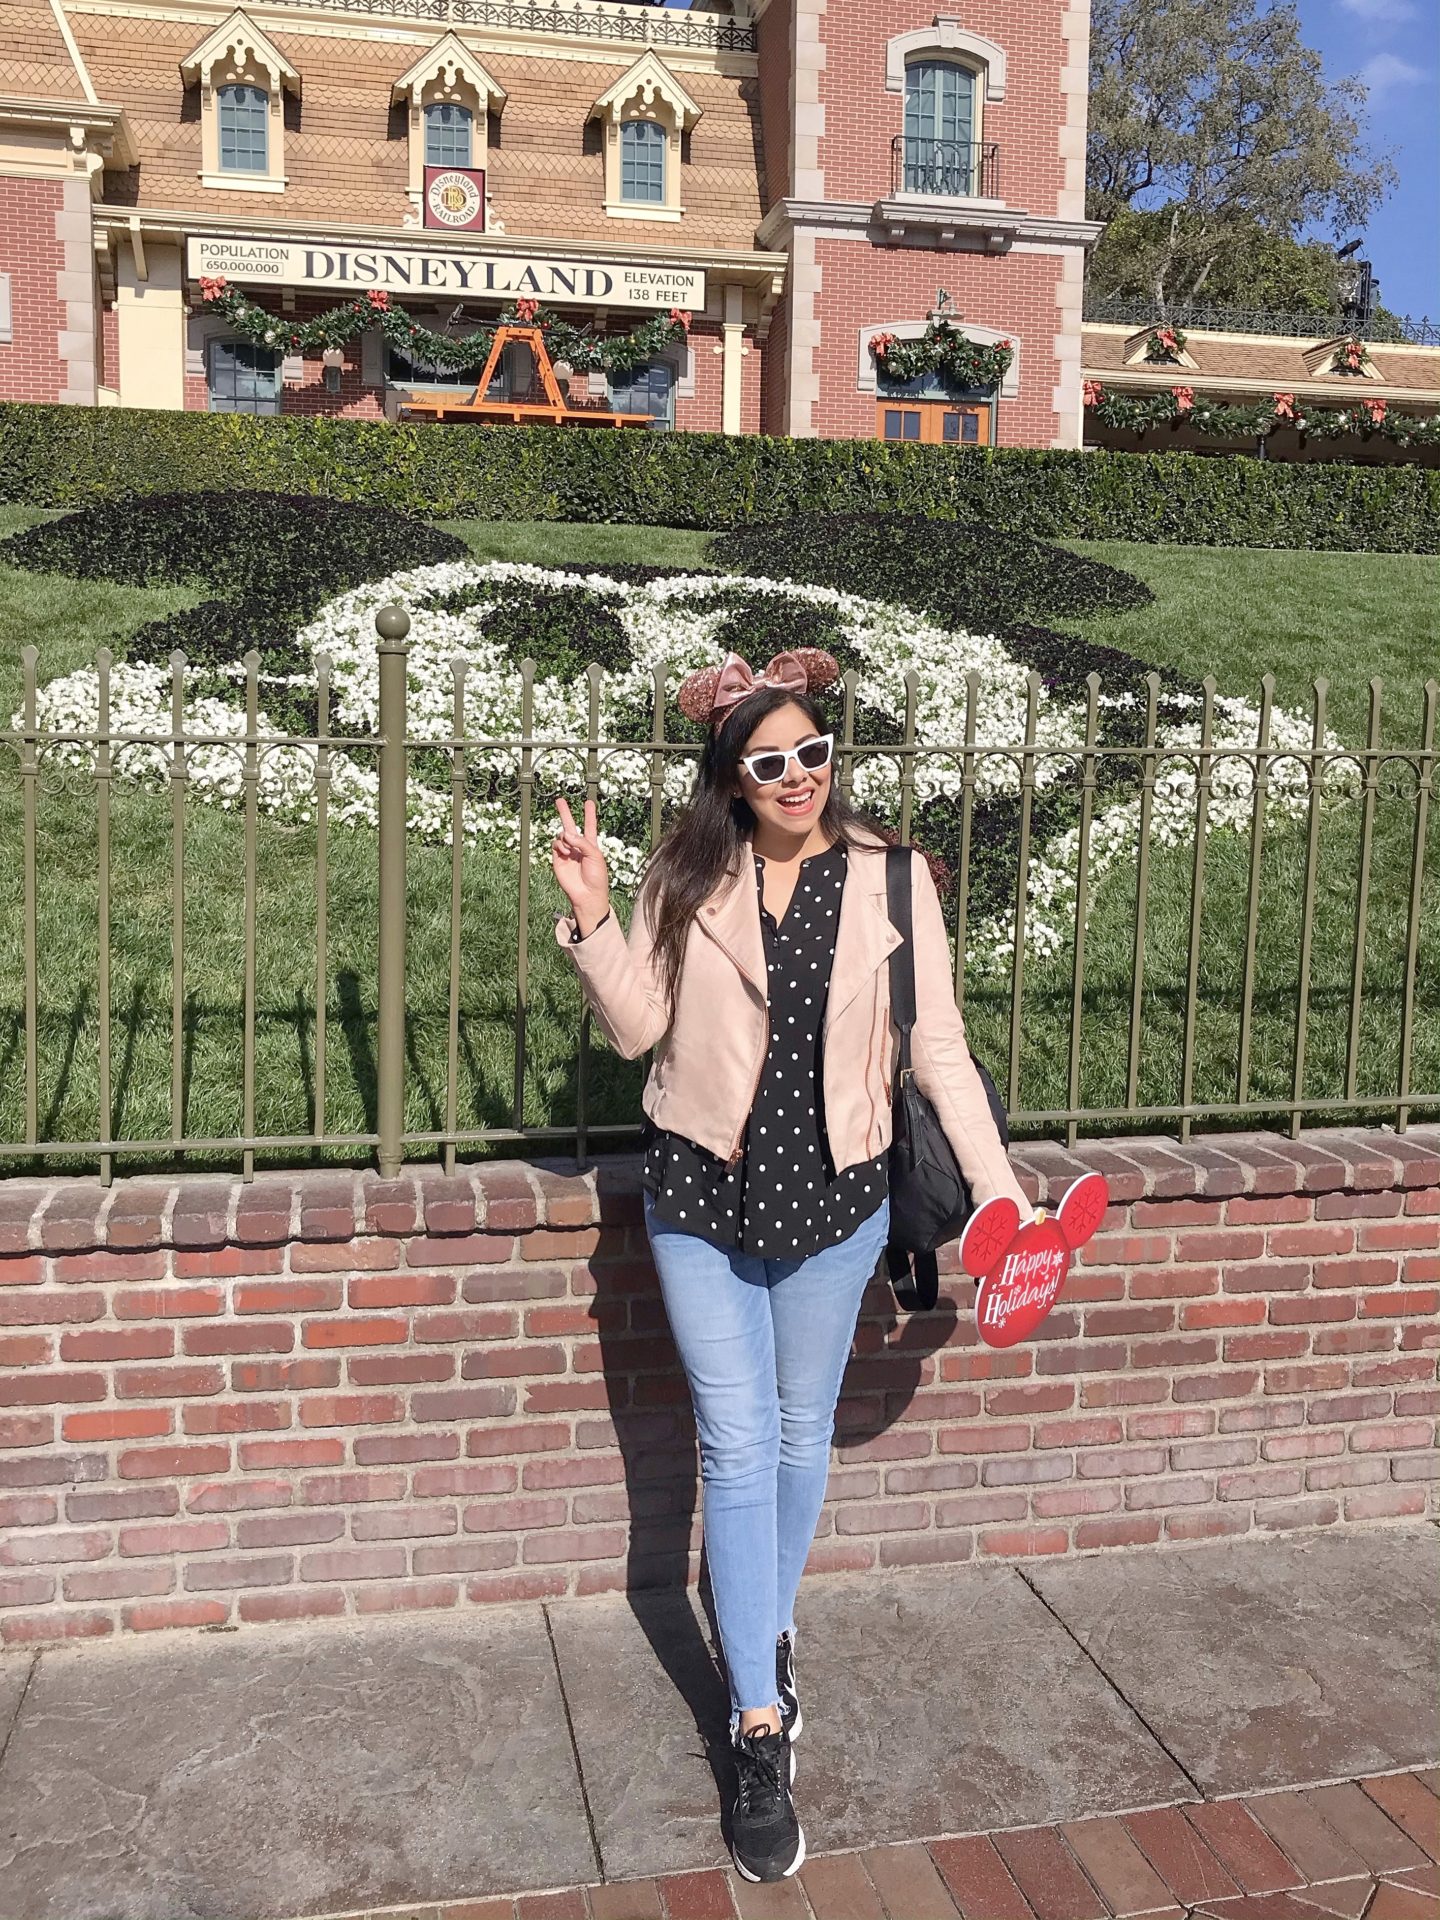 https://lilbitsofchic.com/wp-content/uploads/2019/12/What-to-wear-to-Disneyland-in-December-1440x1920.jpg